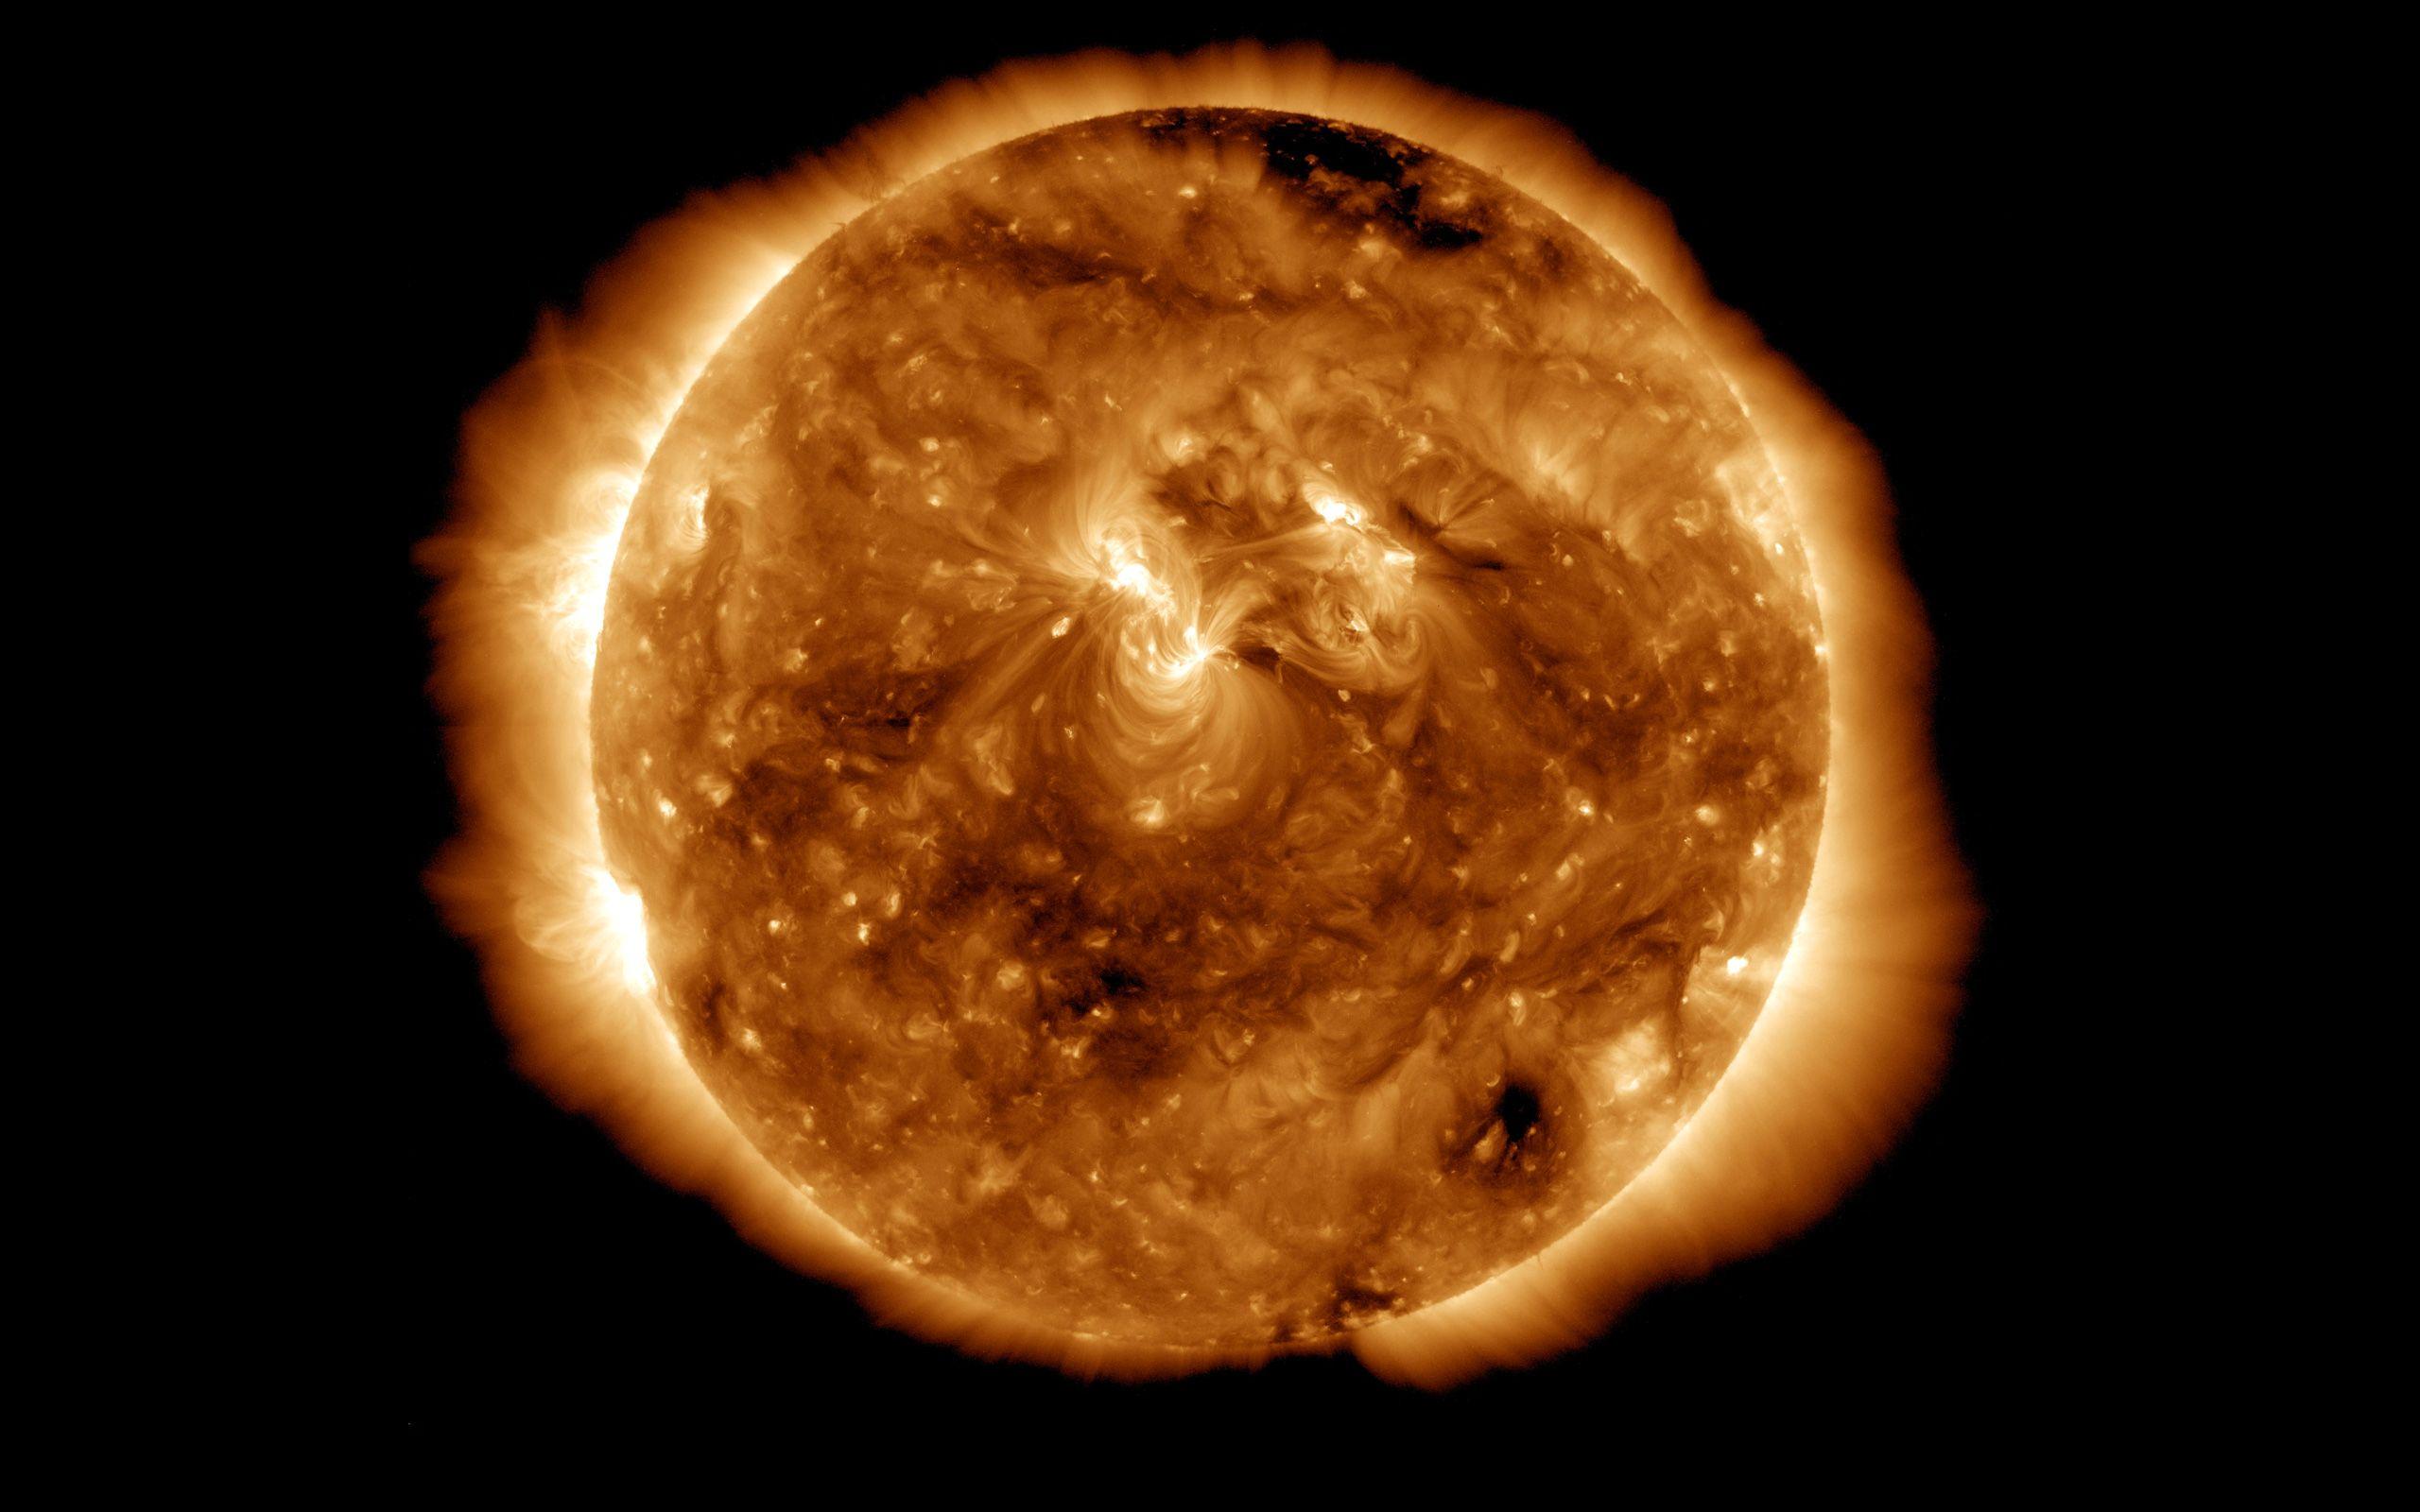 Solar Flare wallpaper and image, picture, photo